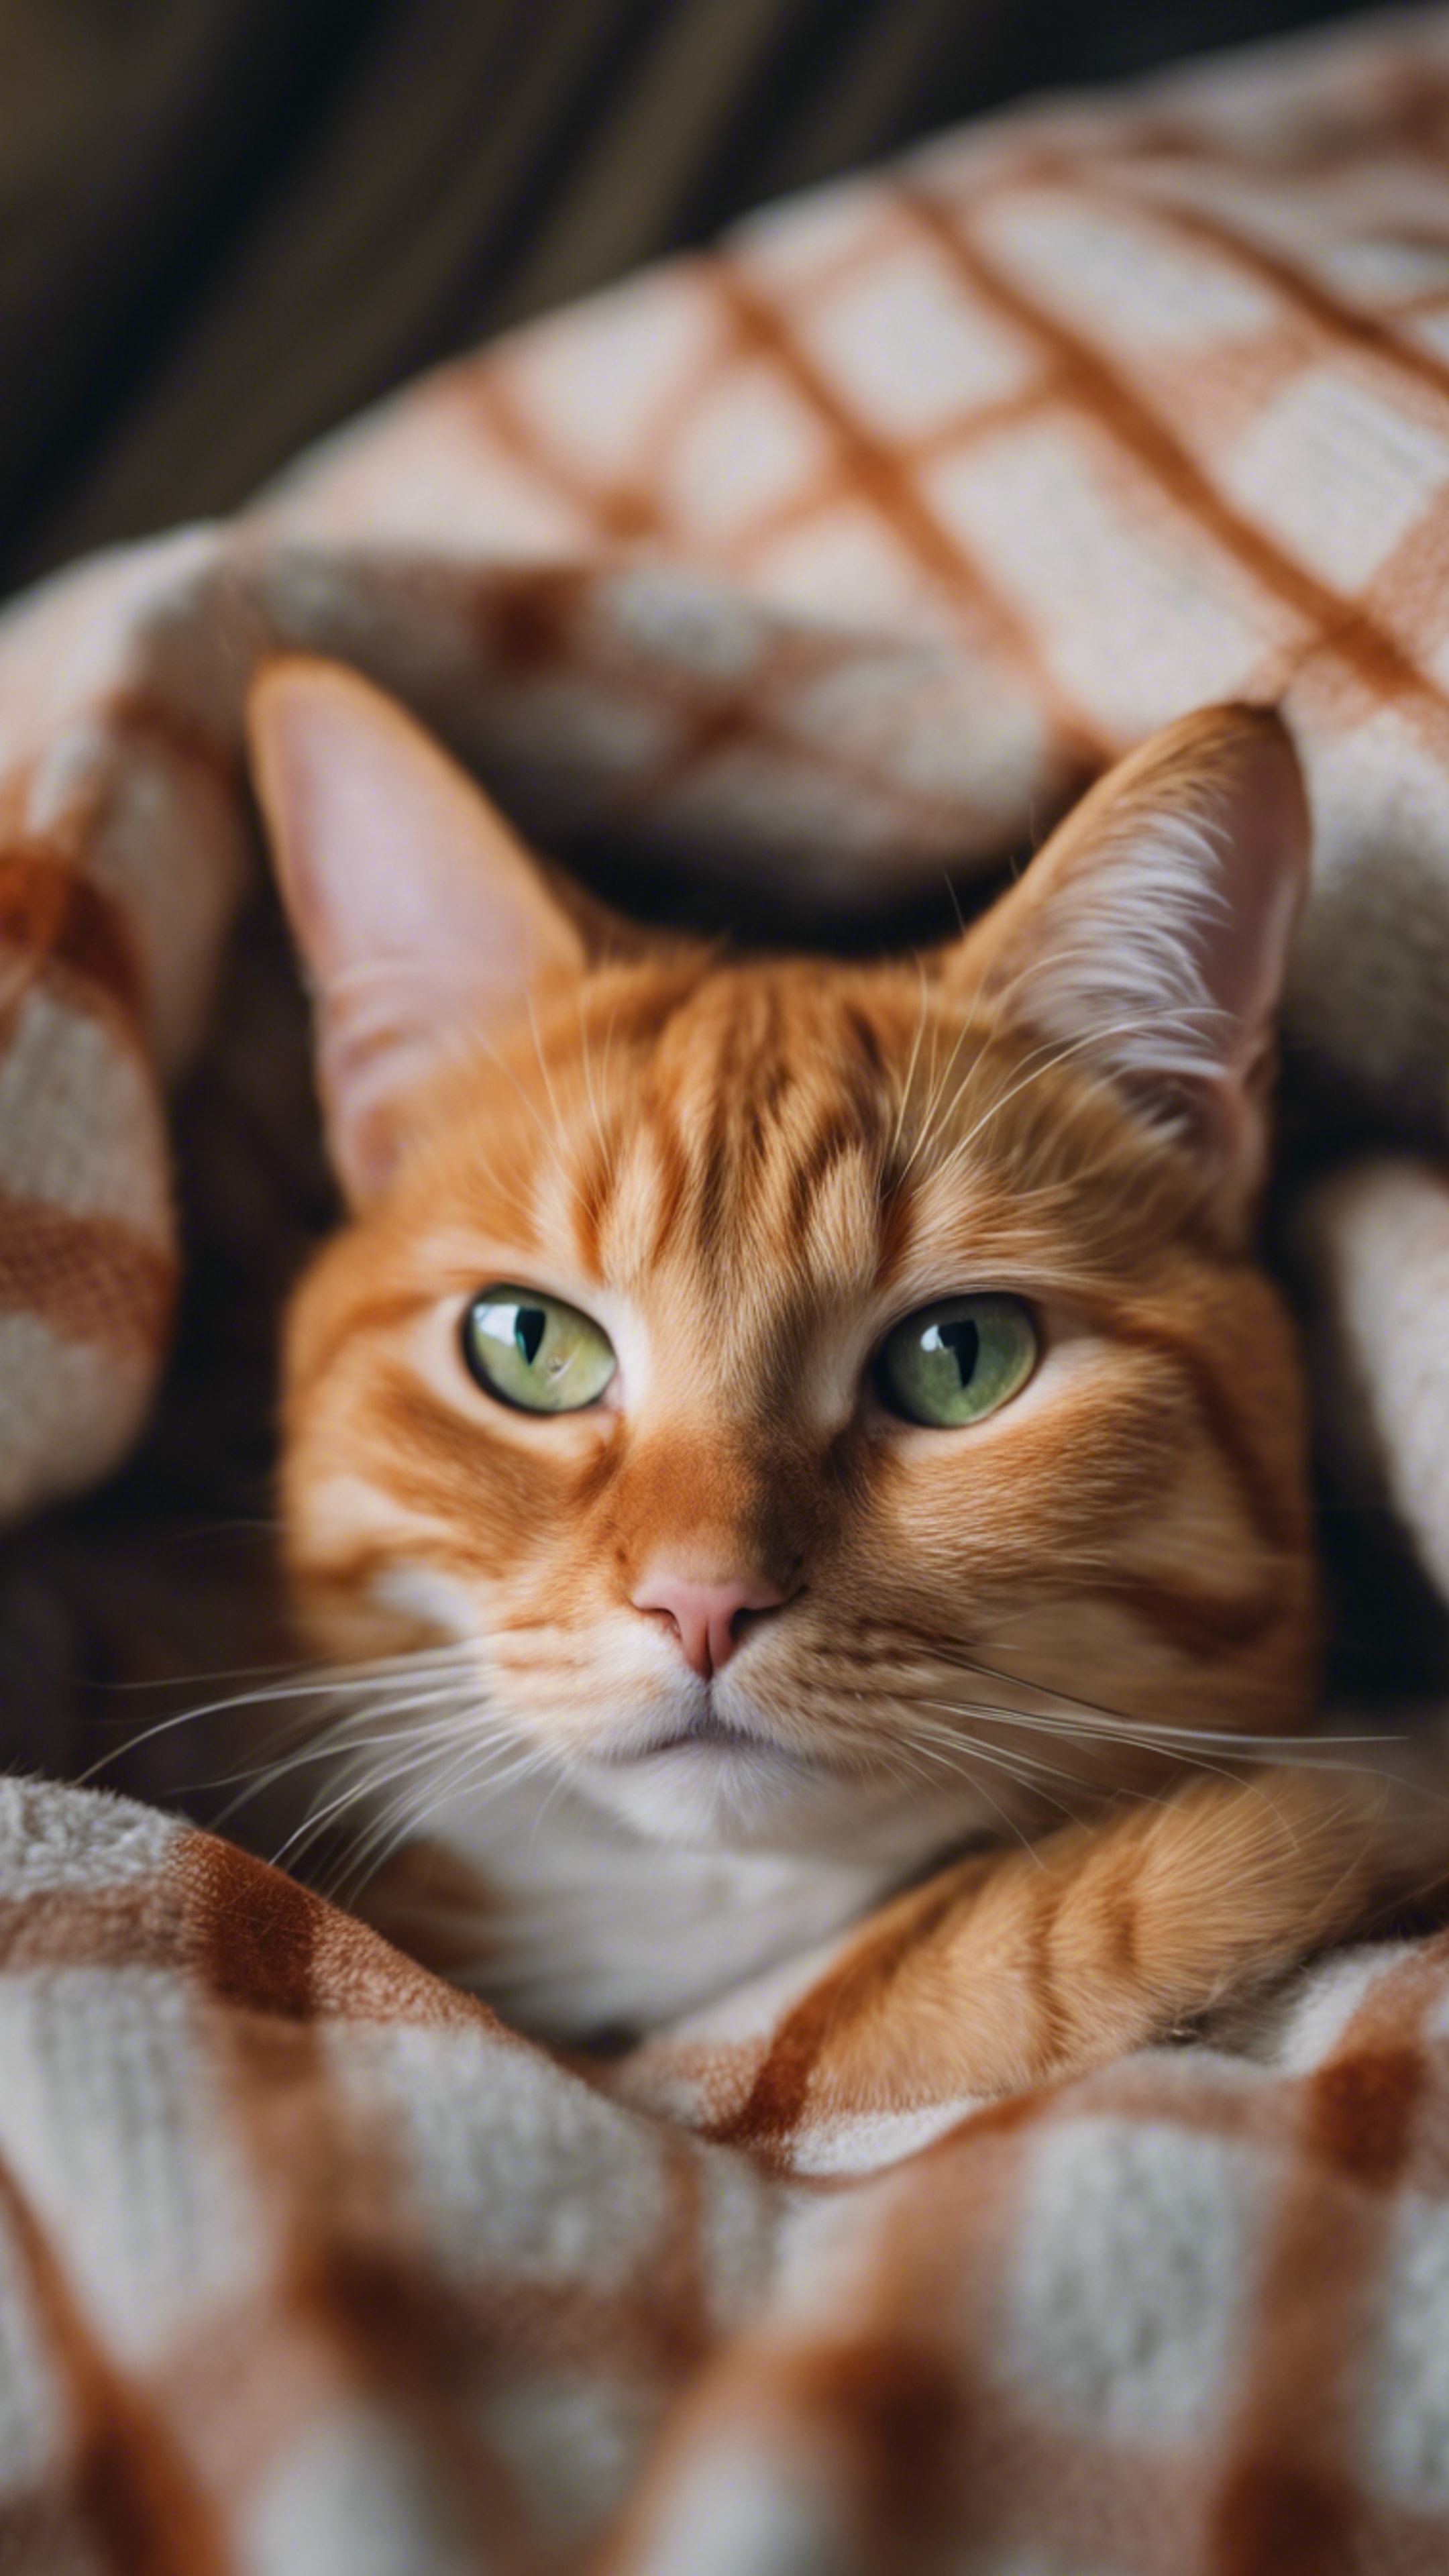 A close up of an orange tabby cat curled up on a cozy plaid blanket, purring gently, with a playful glint in its eyes. Tapéta[45e4538616504ff6a891]